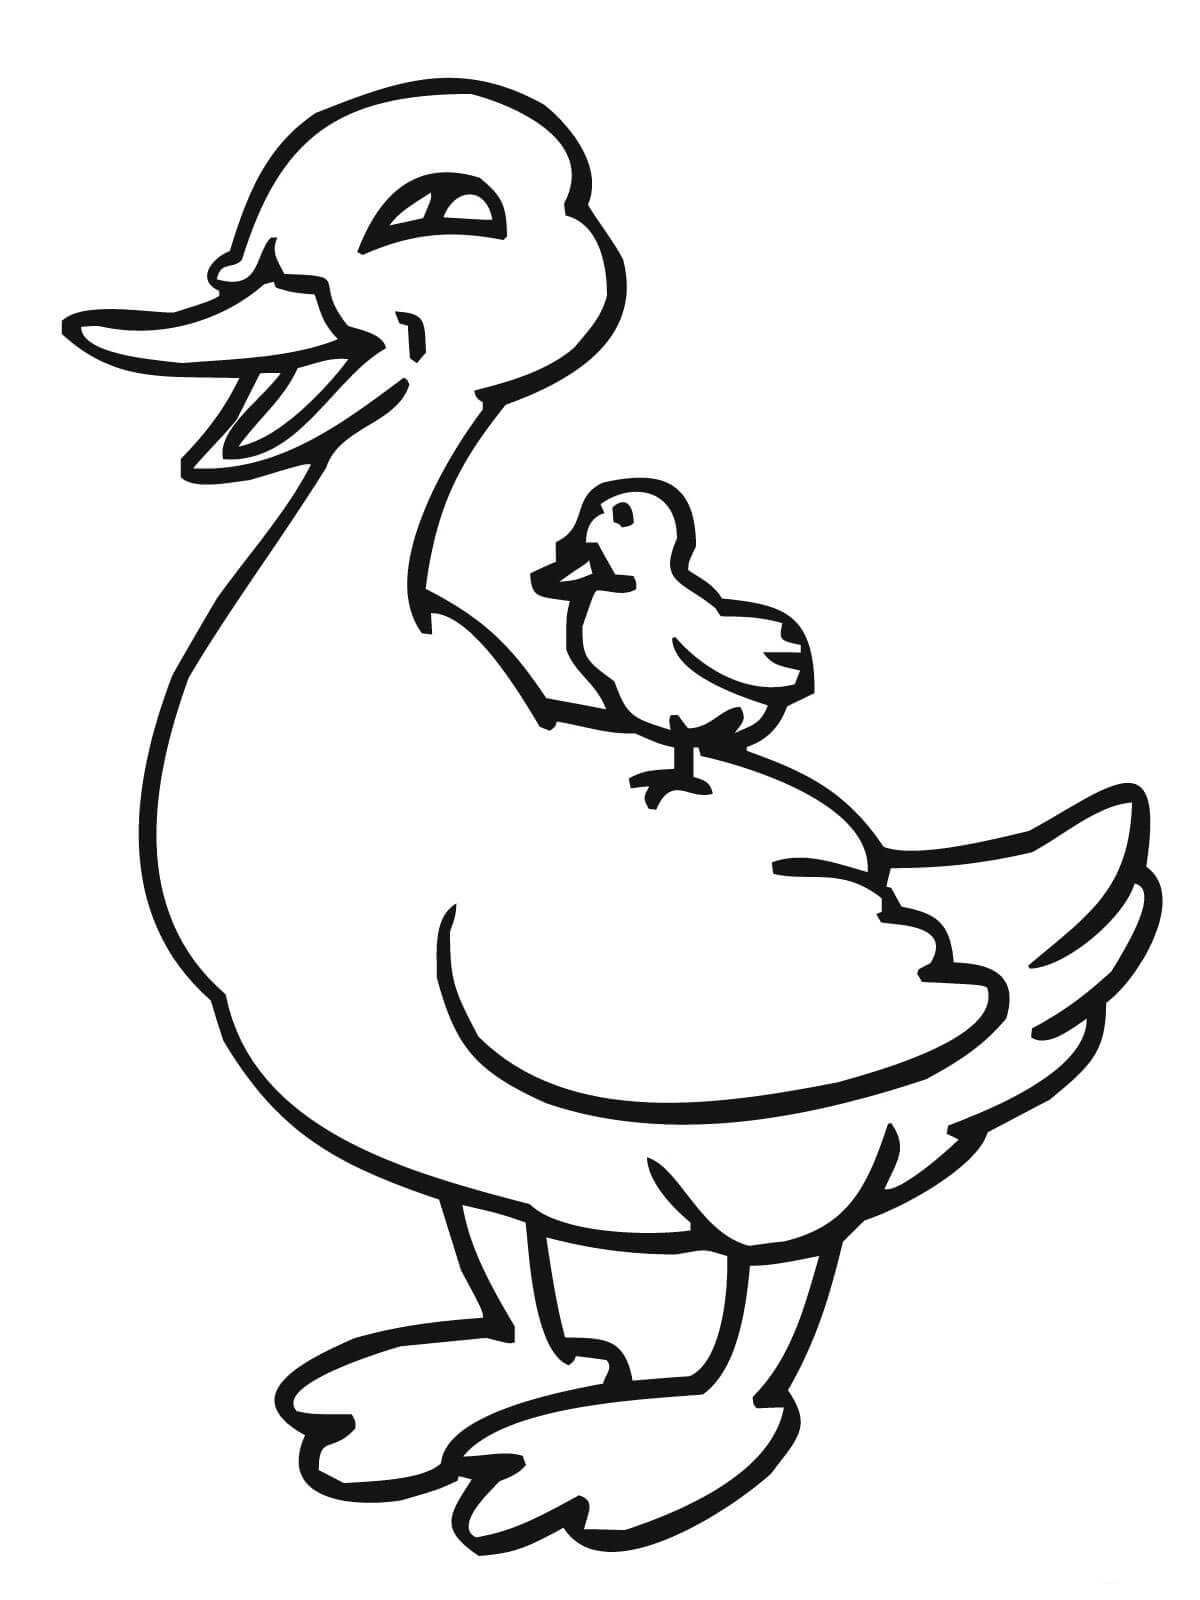 Baby duckling riding on mother duck Coloring Page